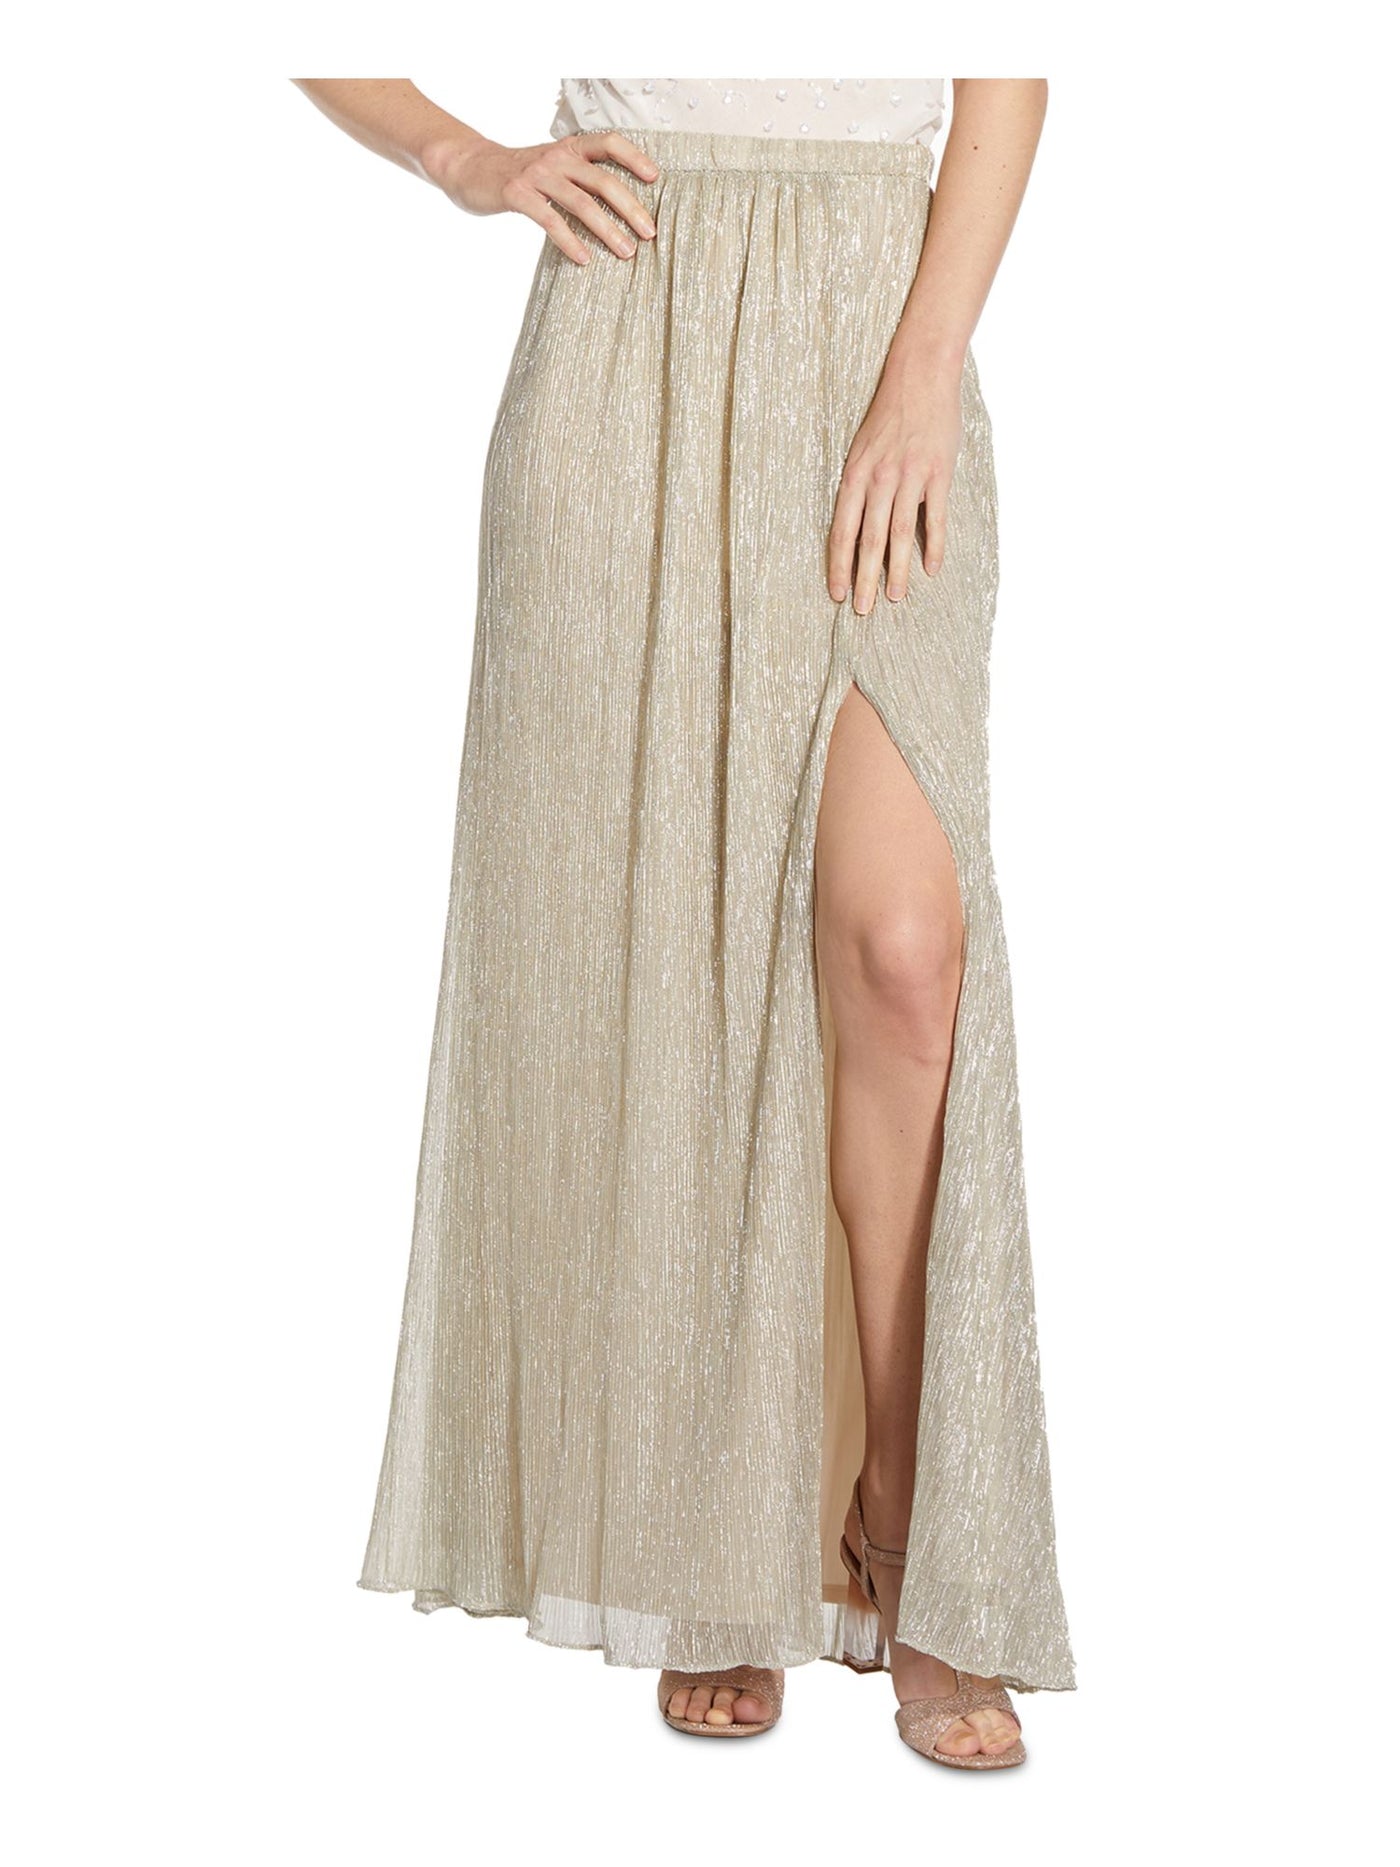 ADRIANNA PAPELL Womens Beige Pleated Zippered Leg Slit Lined Maxi Party A-Line Skirt 10